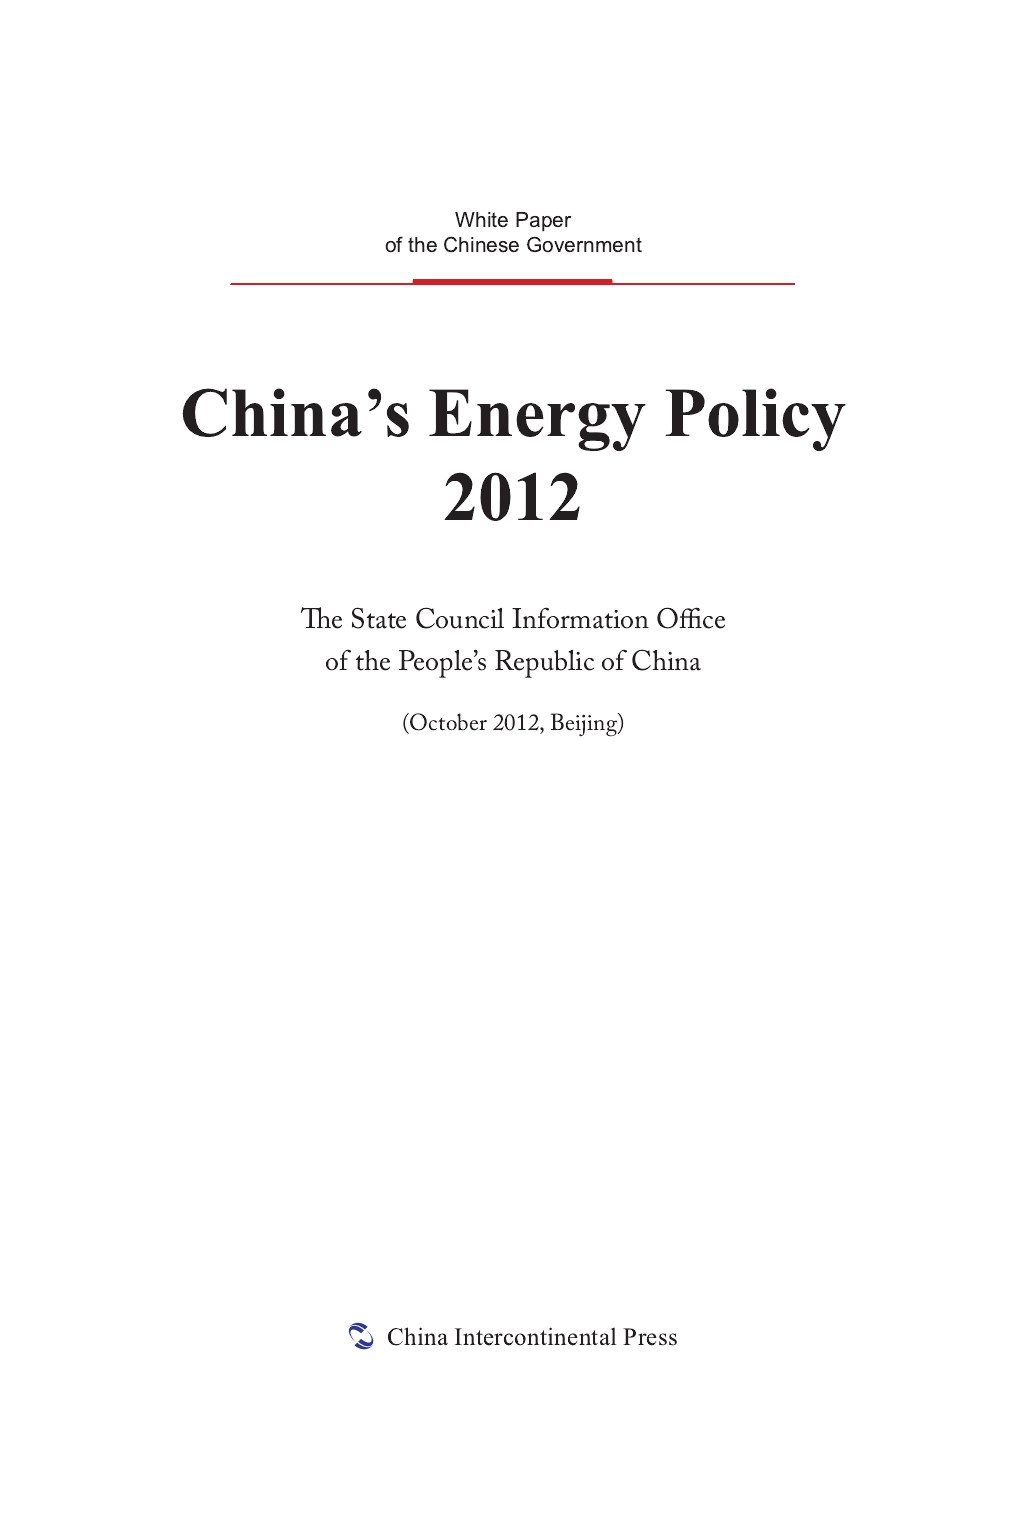 China's Energy Policy 2012